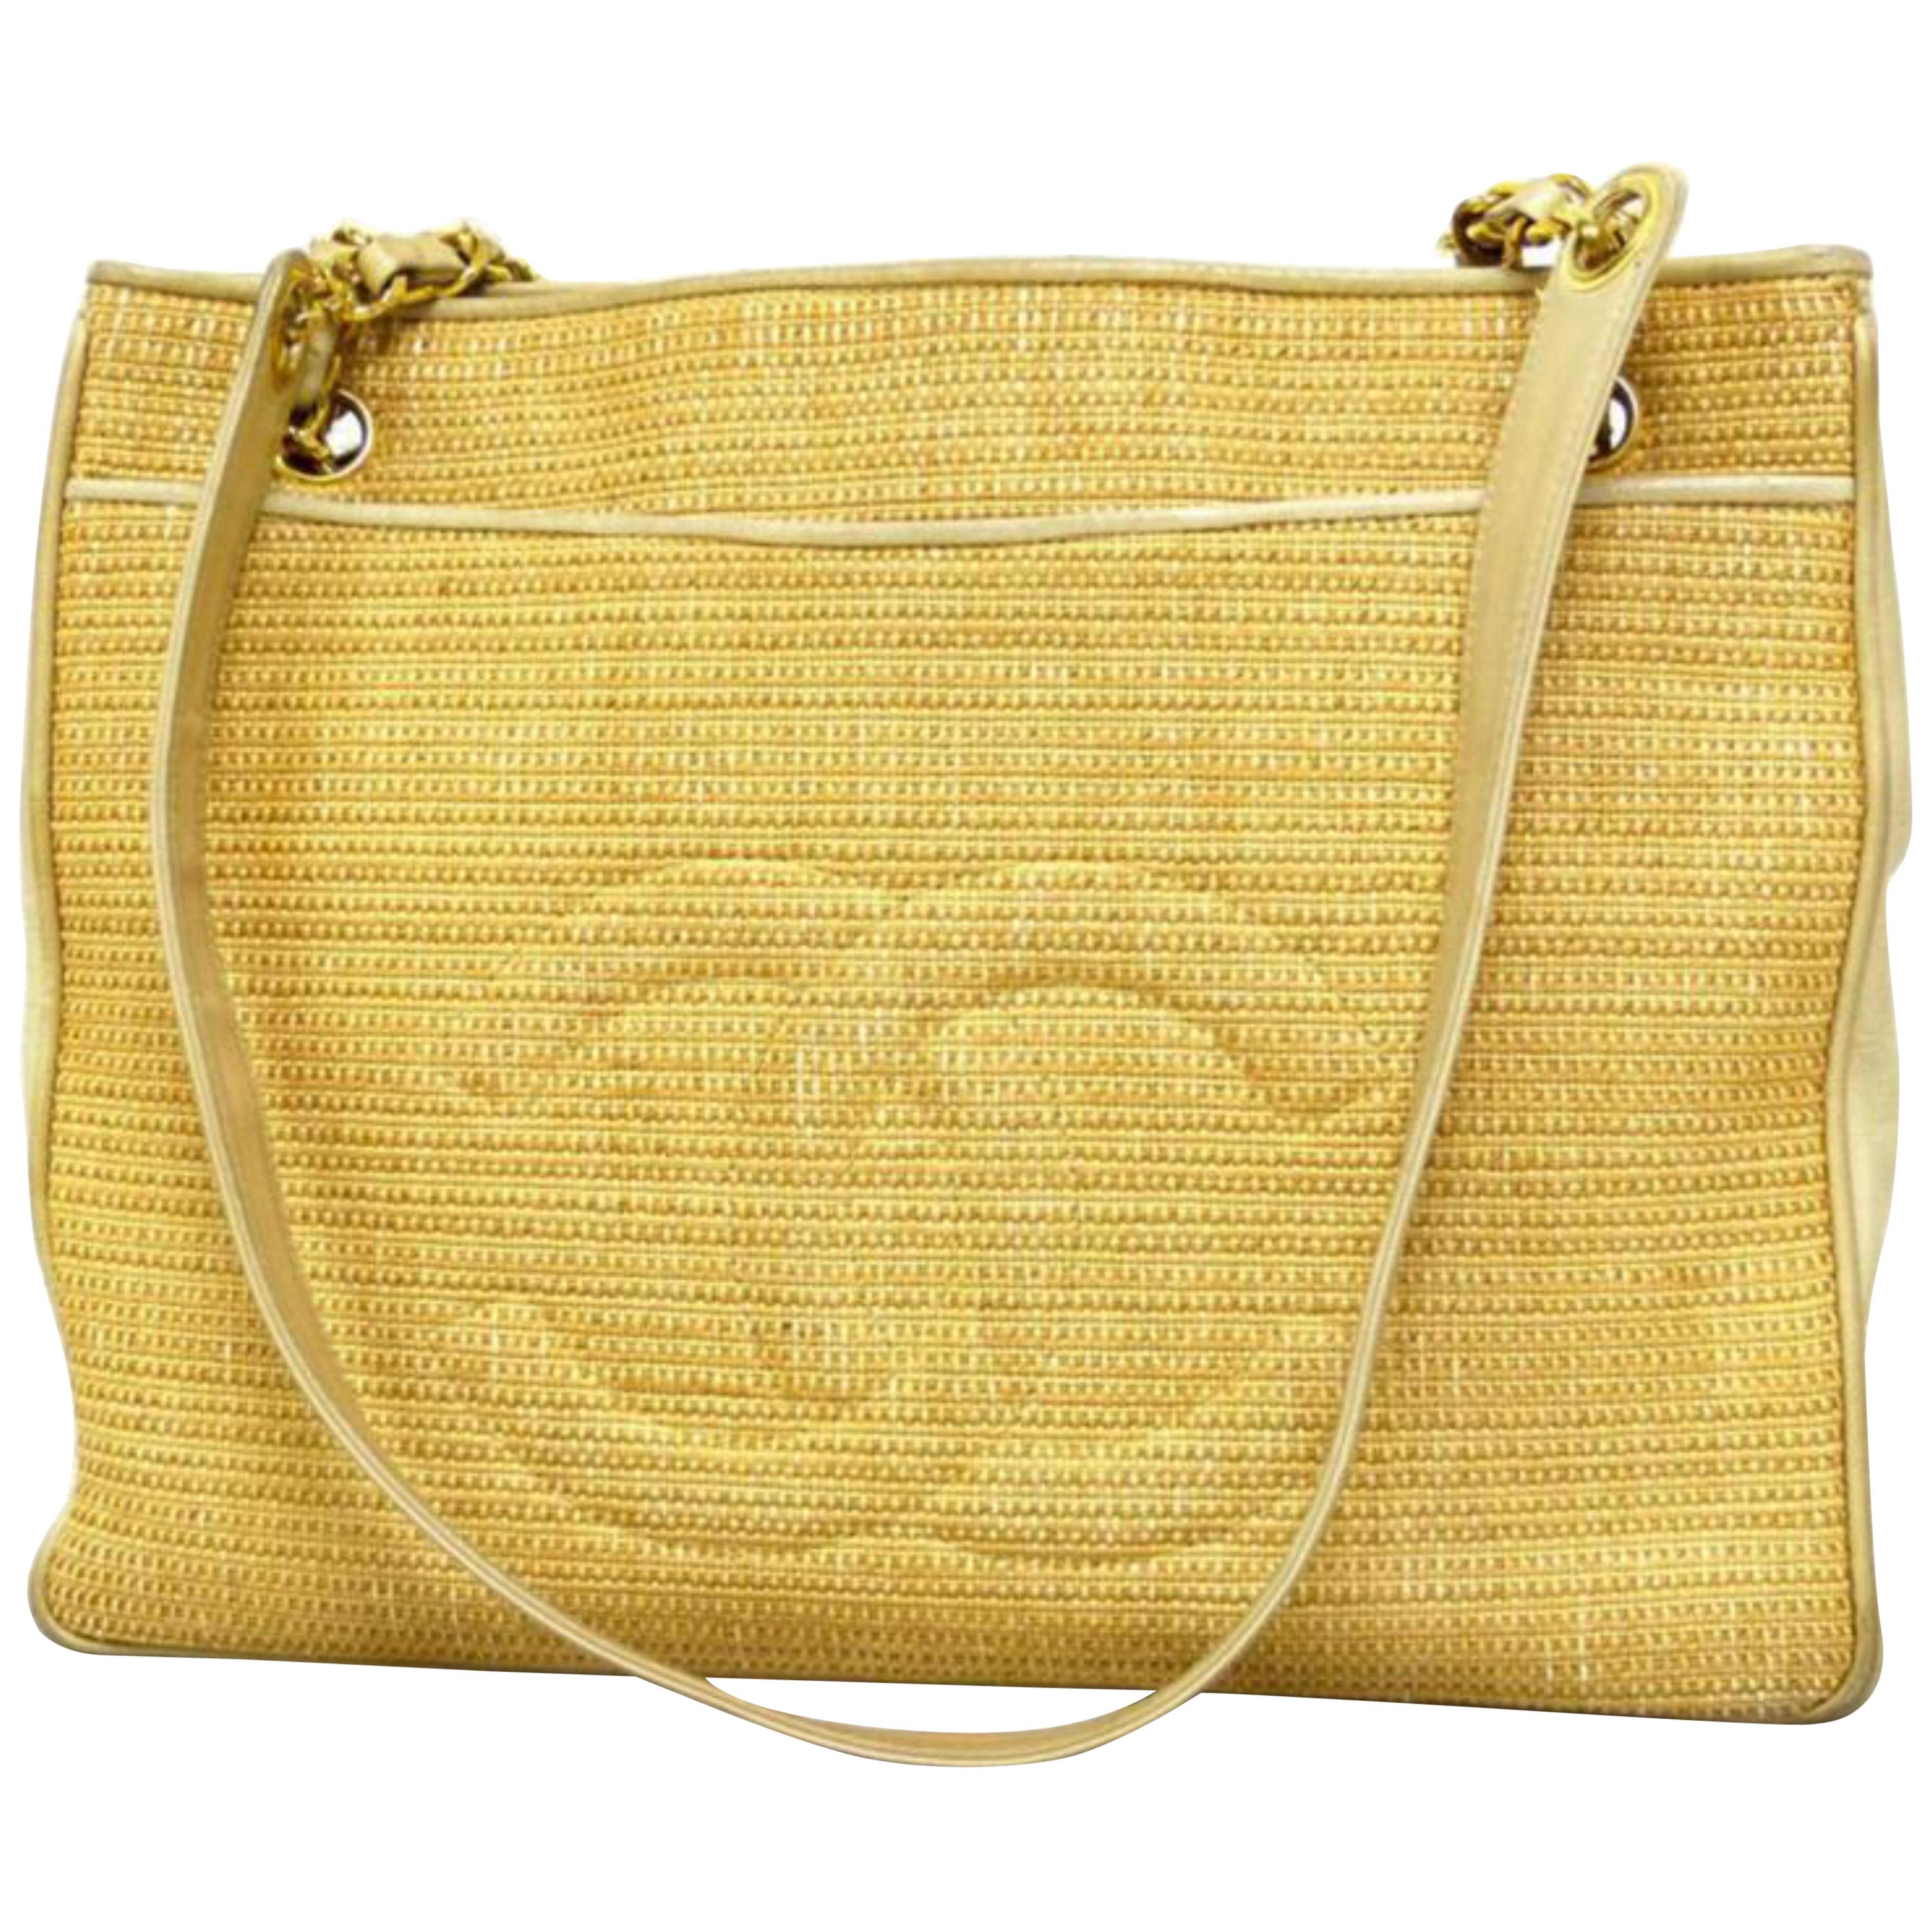 Chanel Cc Logo Chain Tote 221851 Natural Straw X Leather Shoulder Bag For Sale